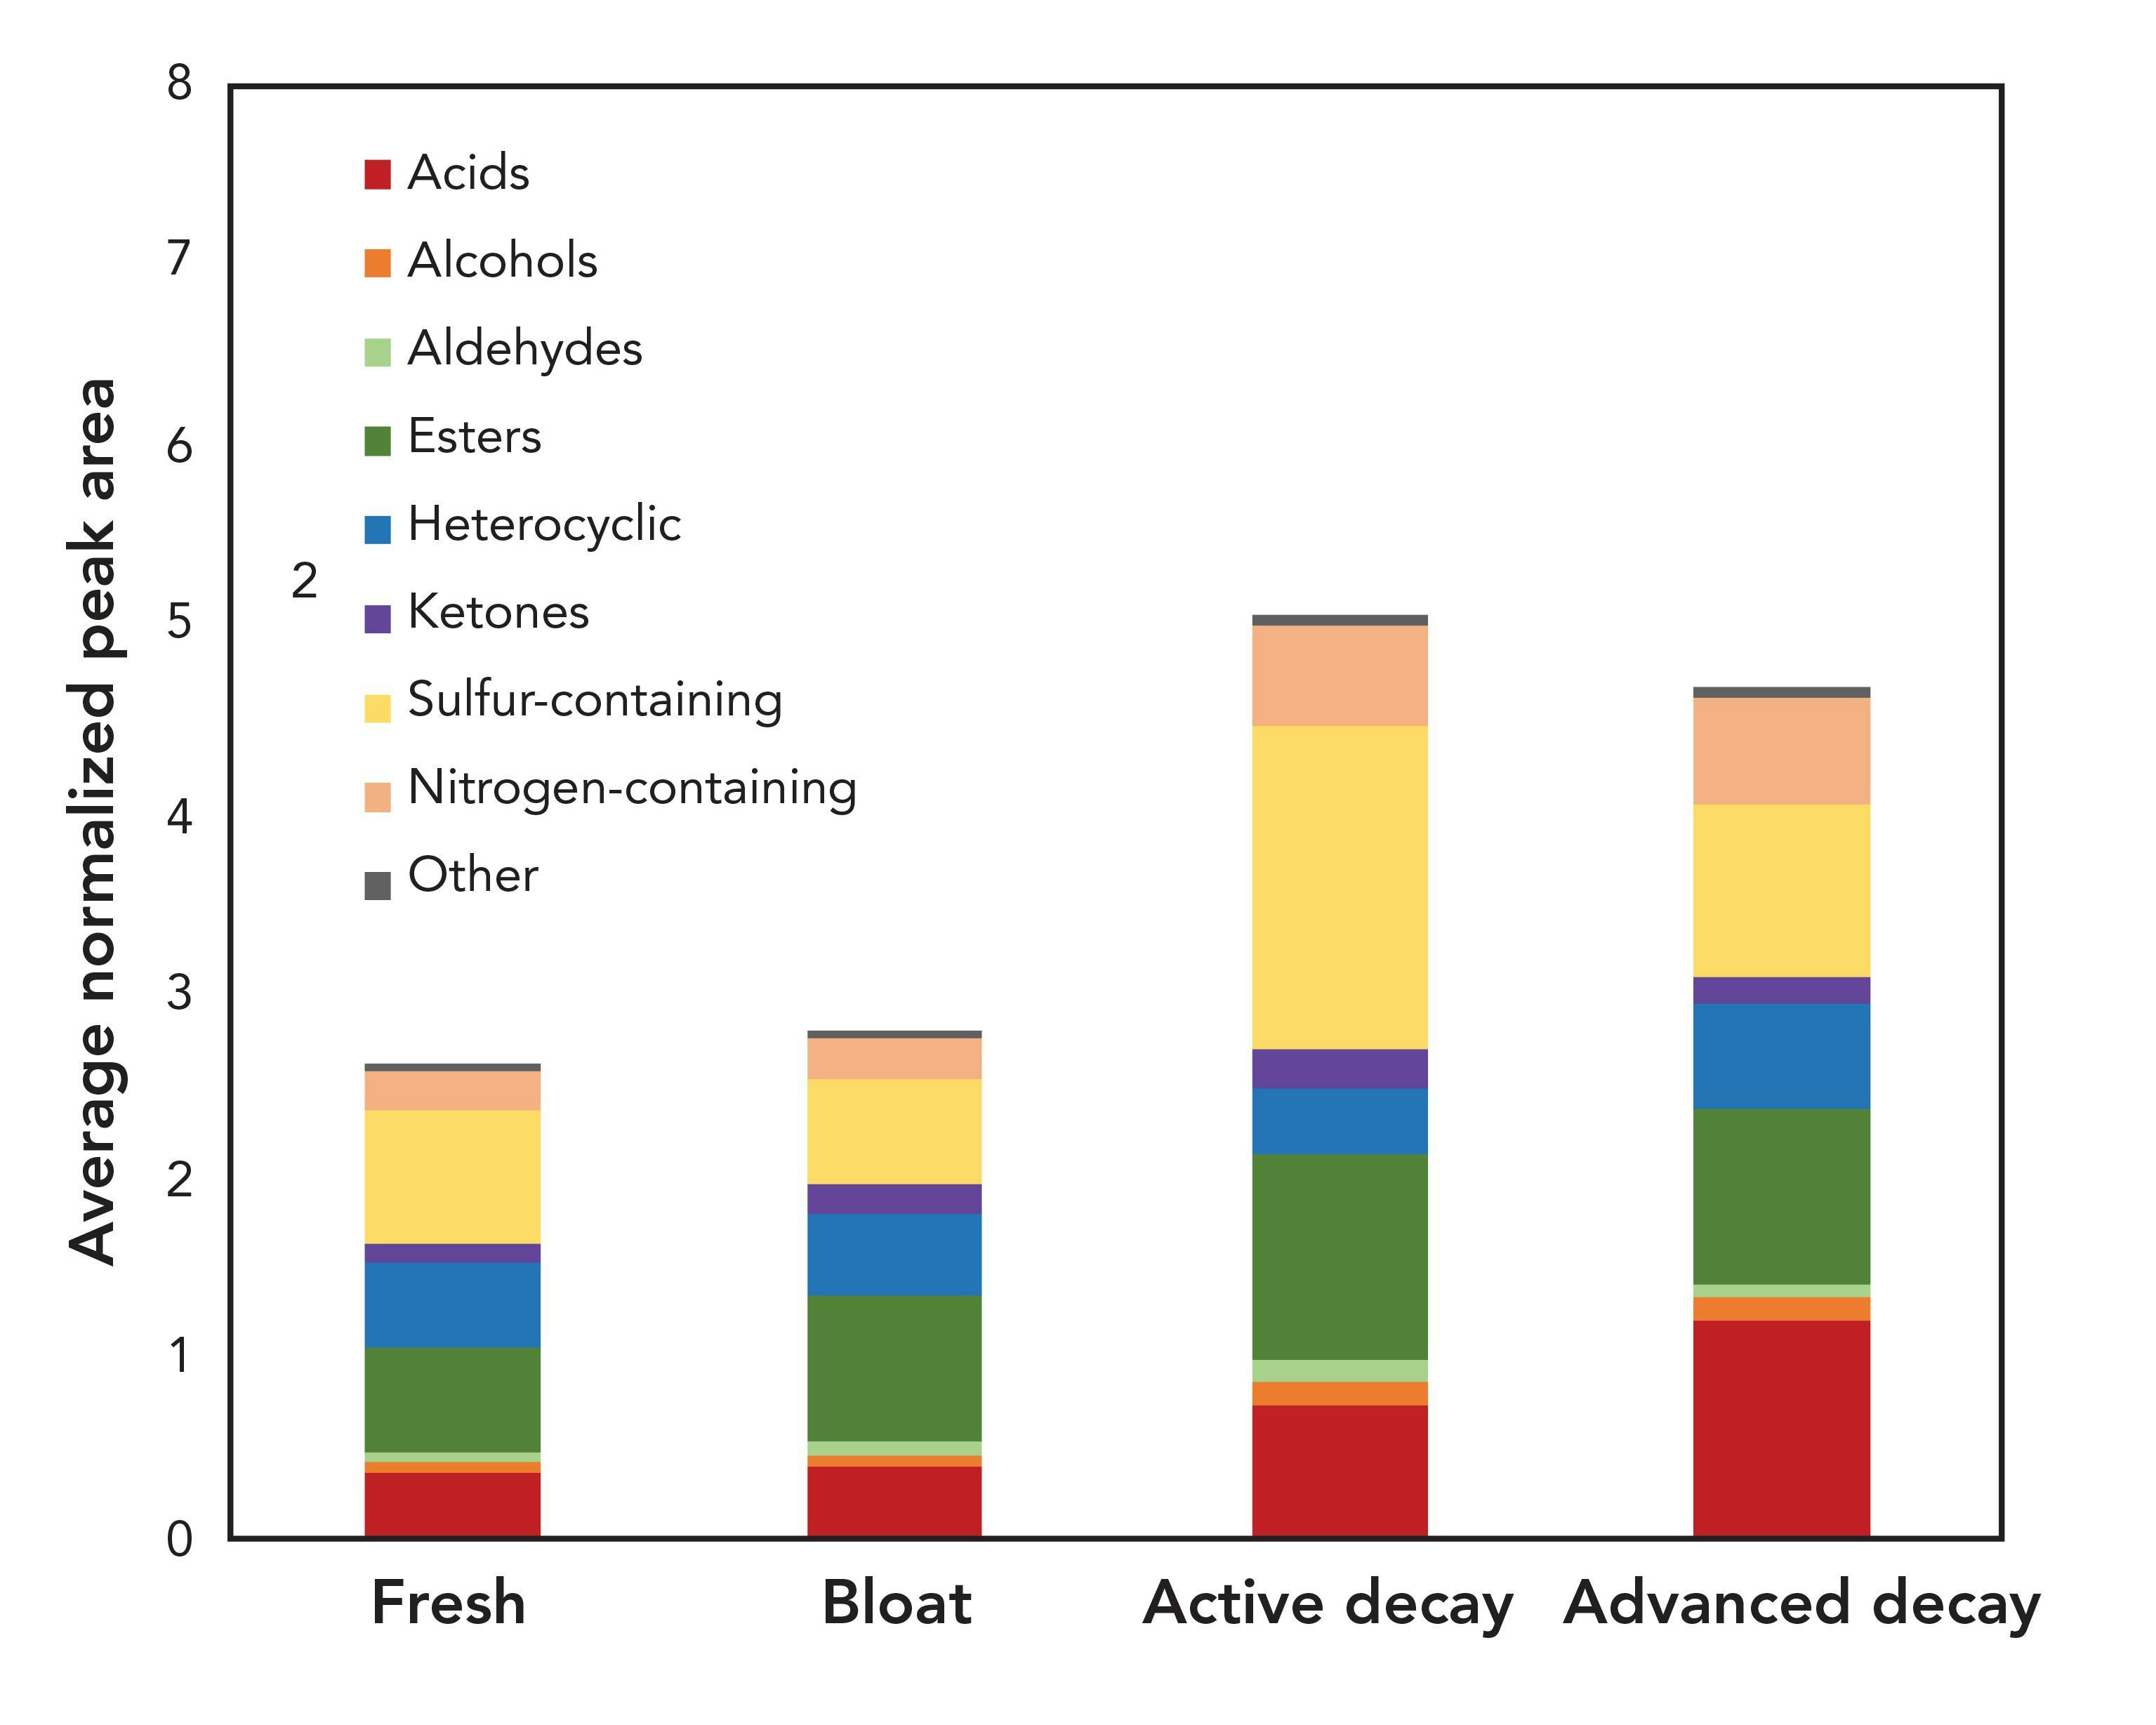 FIGURE 5: Chemical distribution of decomposition volatile organic compound profiles during the fresh, bloat, active decay, and advanced decay stages.